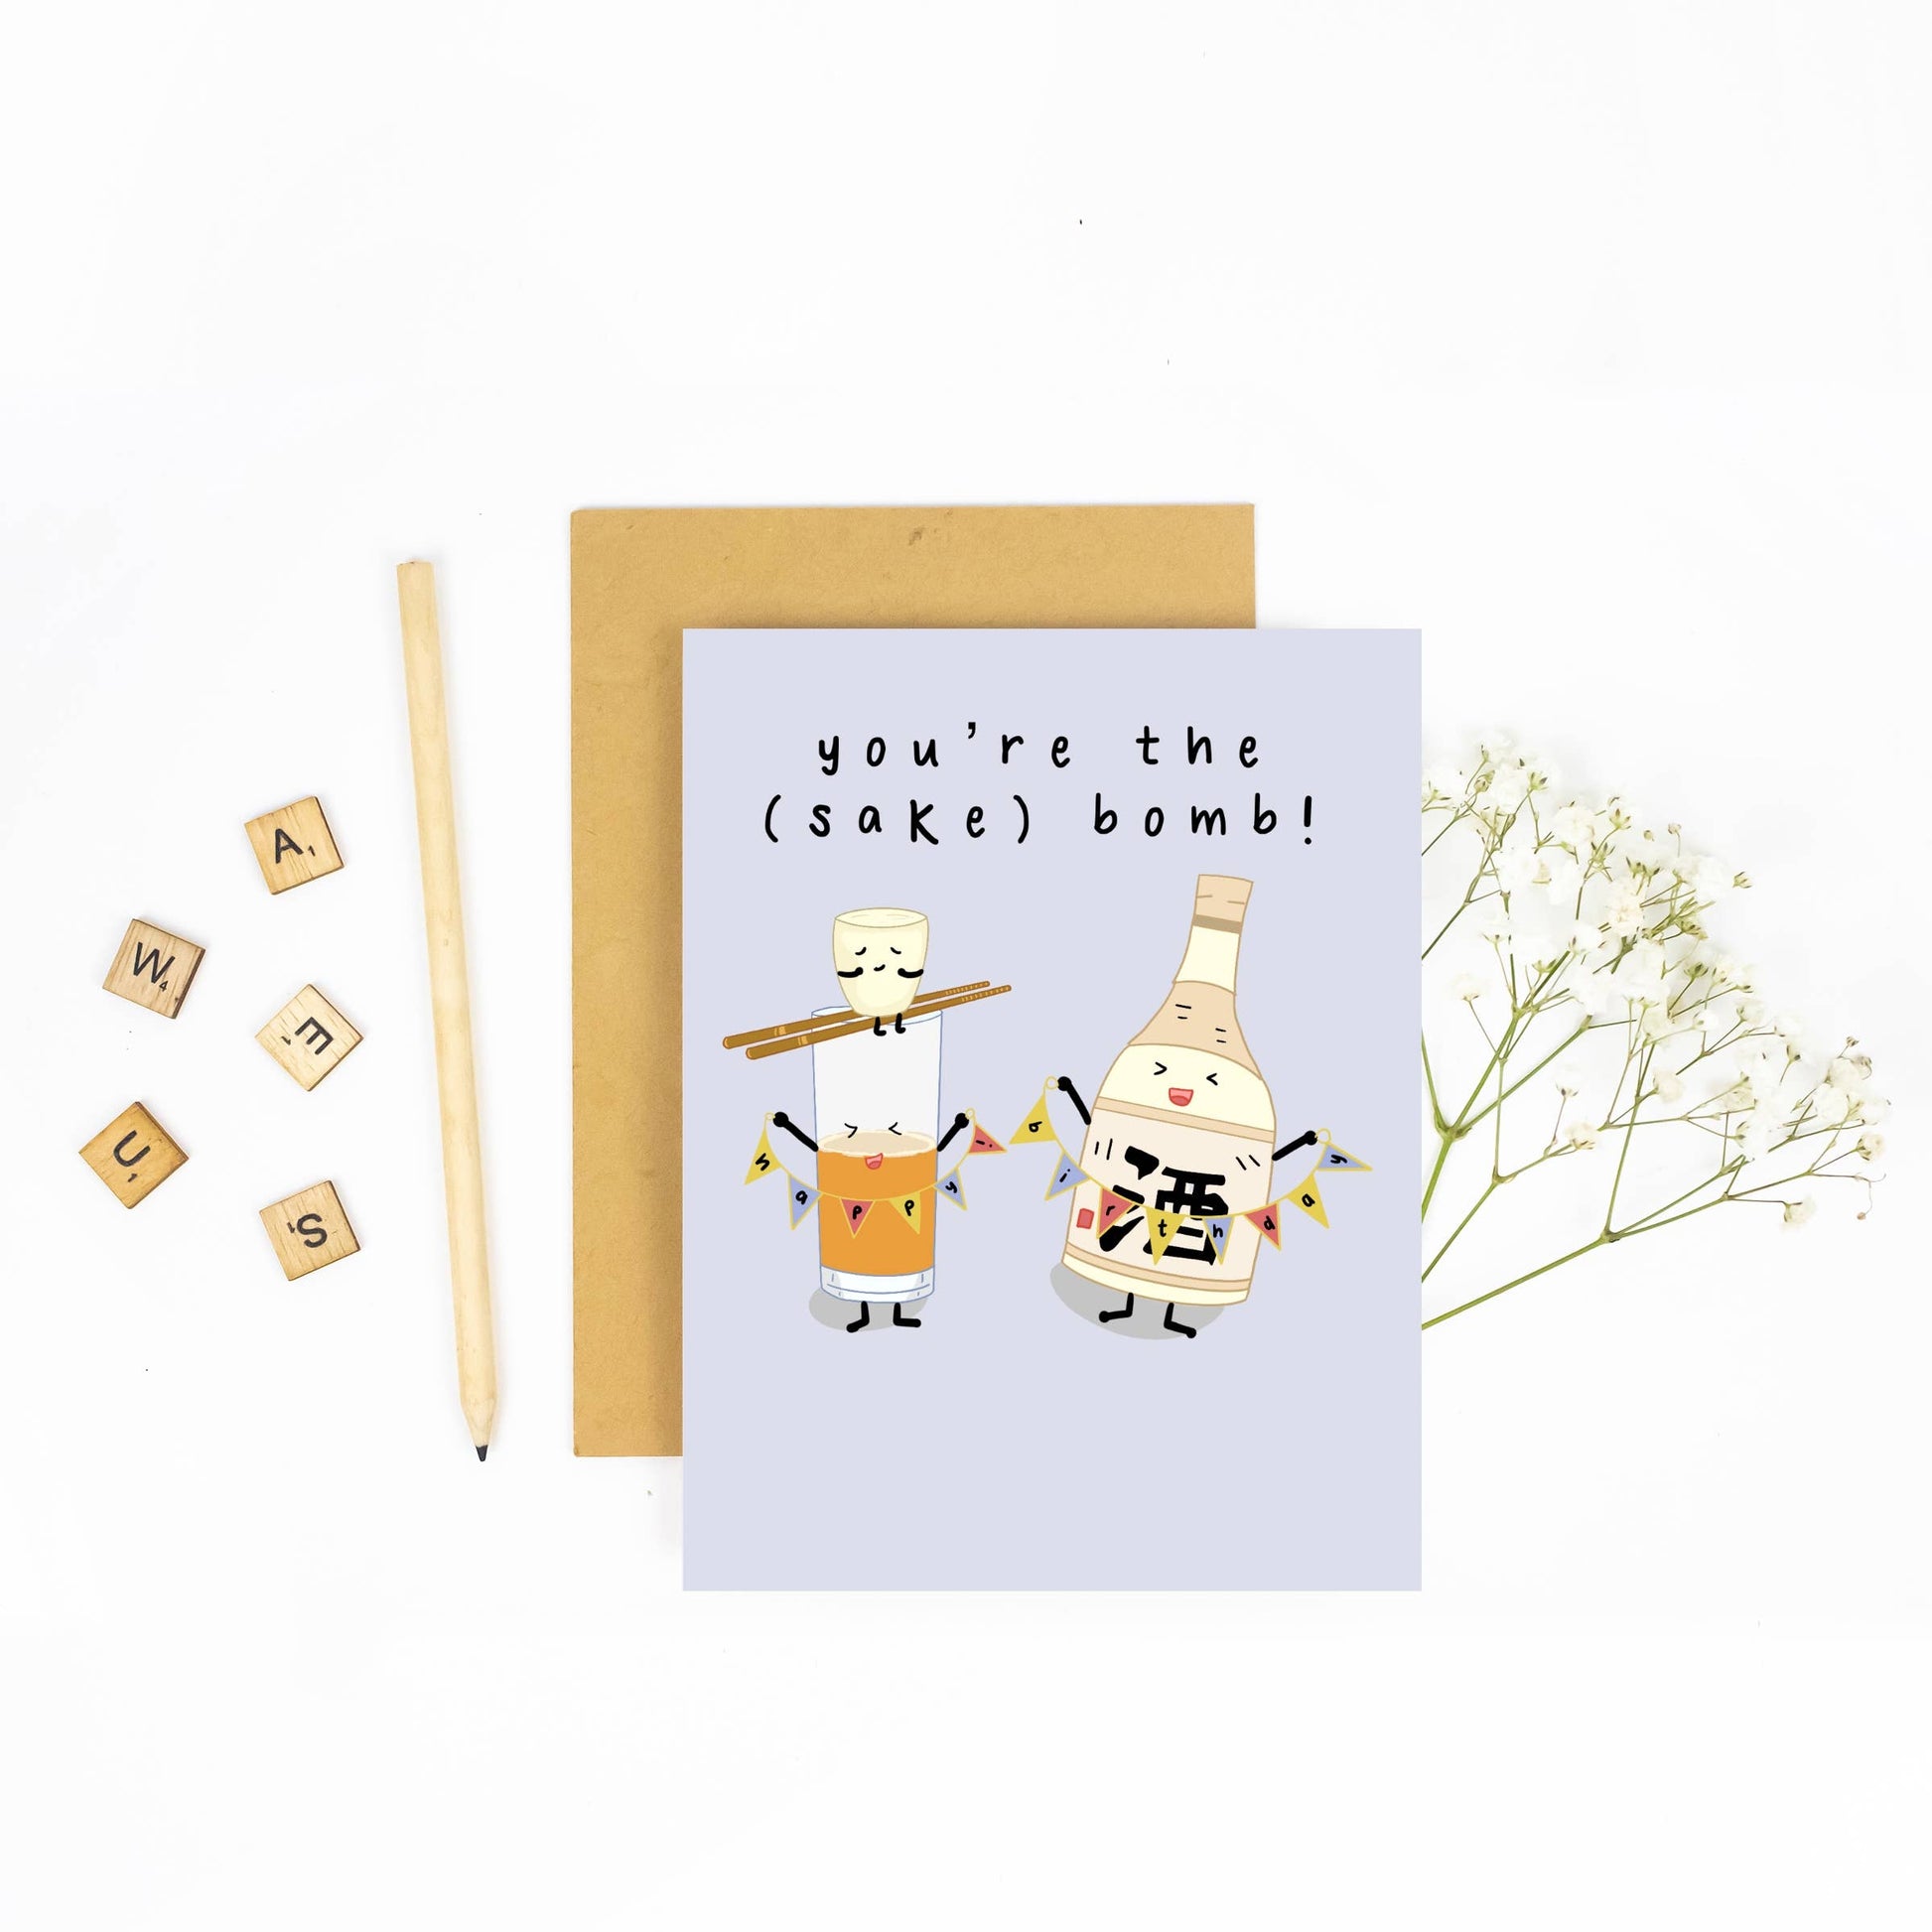 Pale blue greeting card with illustration of a happy anthropomorphic Sake Bottle holding a colorful banner that reads "happy birthday," while a Sake Cup sits precariously on top of chopsticks perched over a glass of beer. Text reads "you're the (sake) bomb!" 